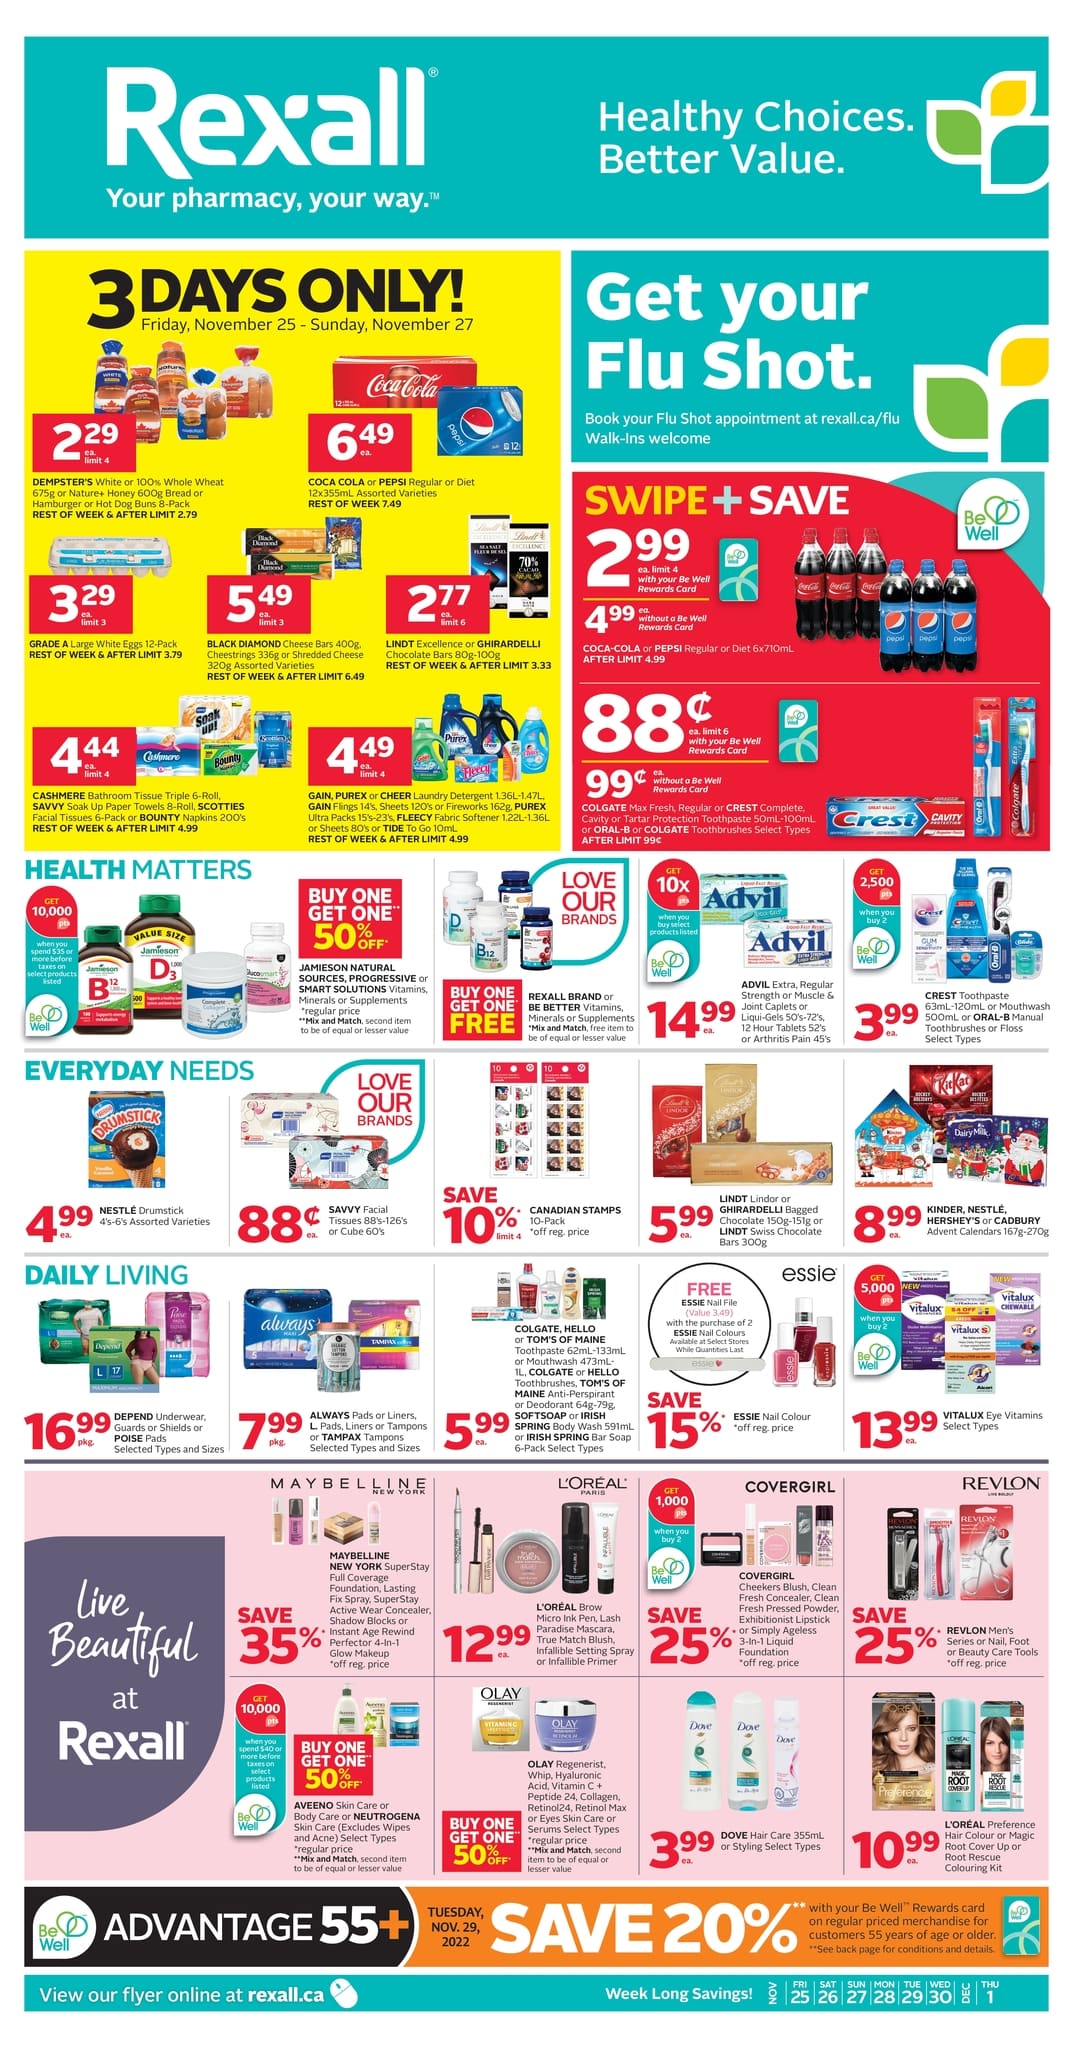 Rexall - Weekly Flyer Specials - Black Friday Deals - Page 2